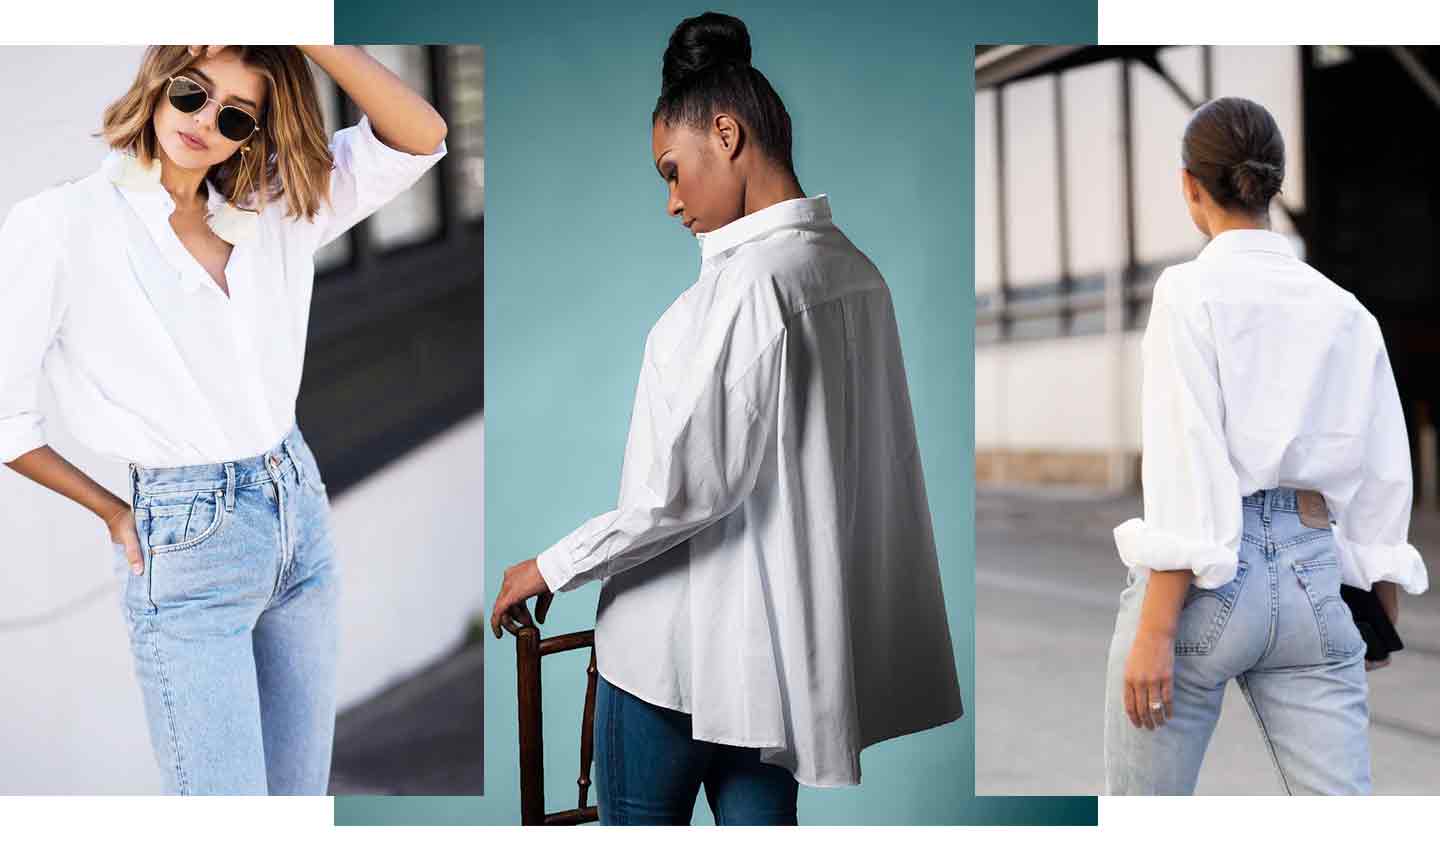 group-of-images-of-women-wearing-white-shirts-and-blue-denim-jeans